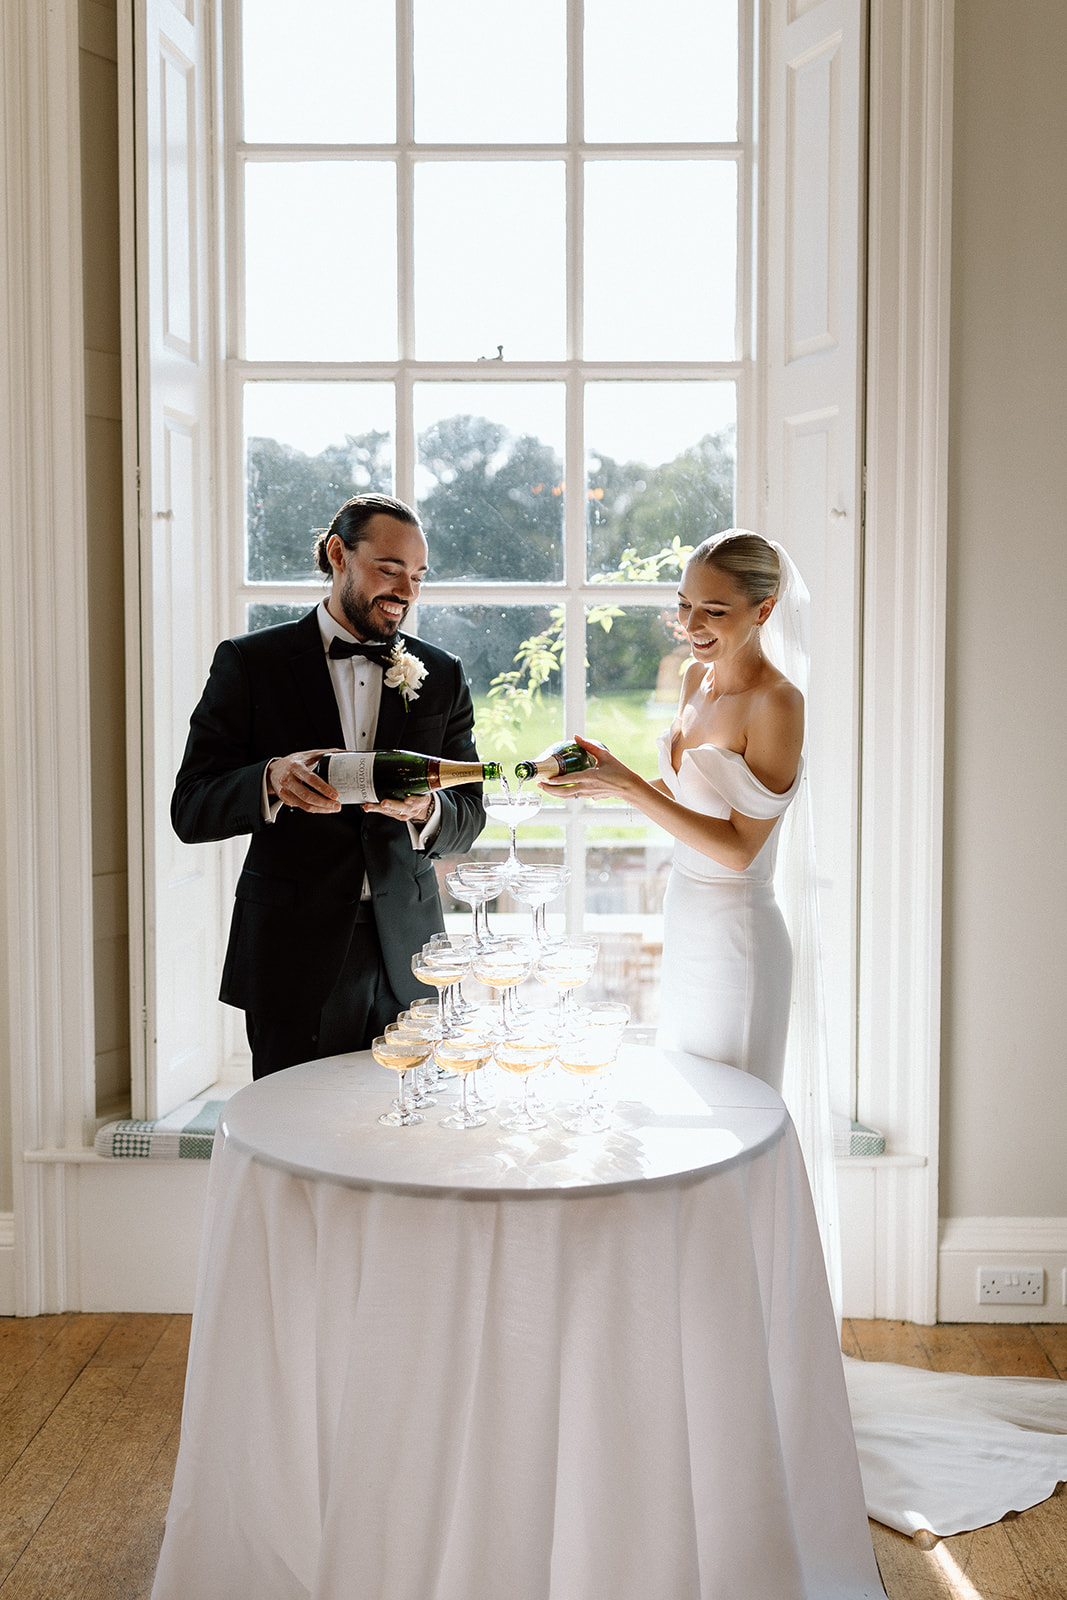 Your complete guide on how to build the best wedding champagne tower for your big day including flower ice cubes inspiration at Iscoyd Park